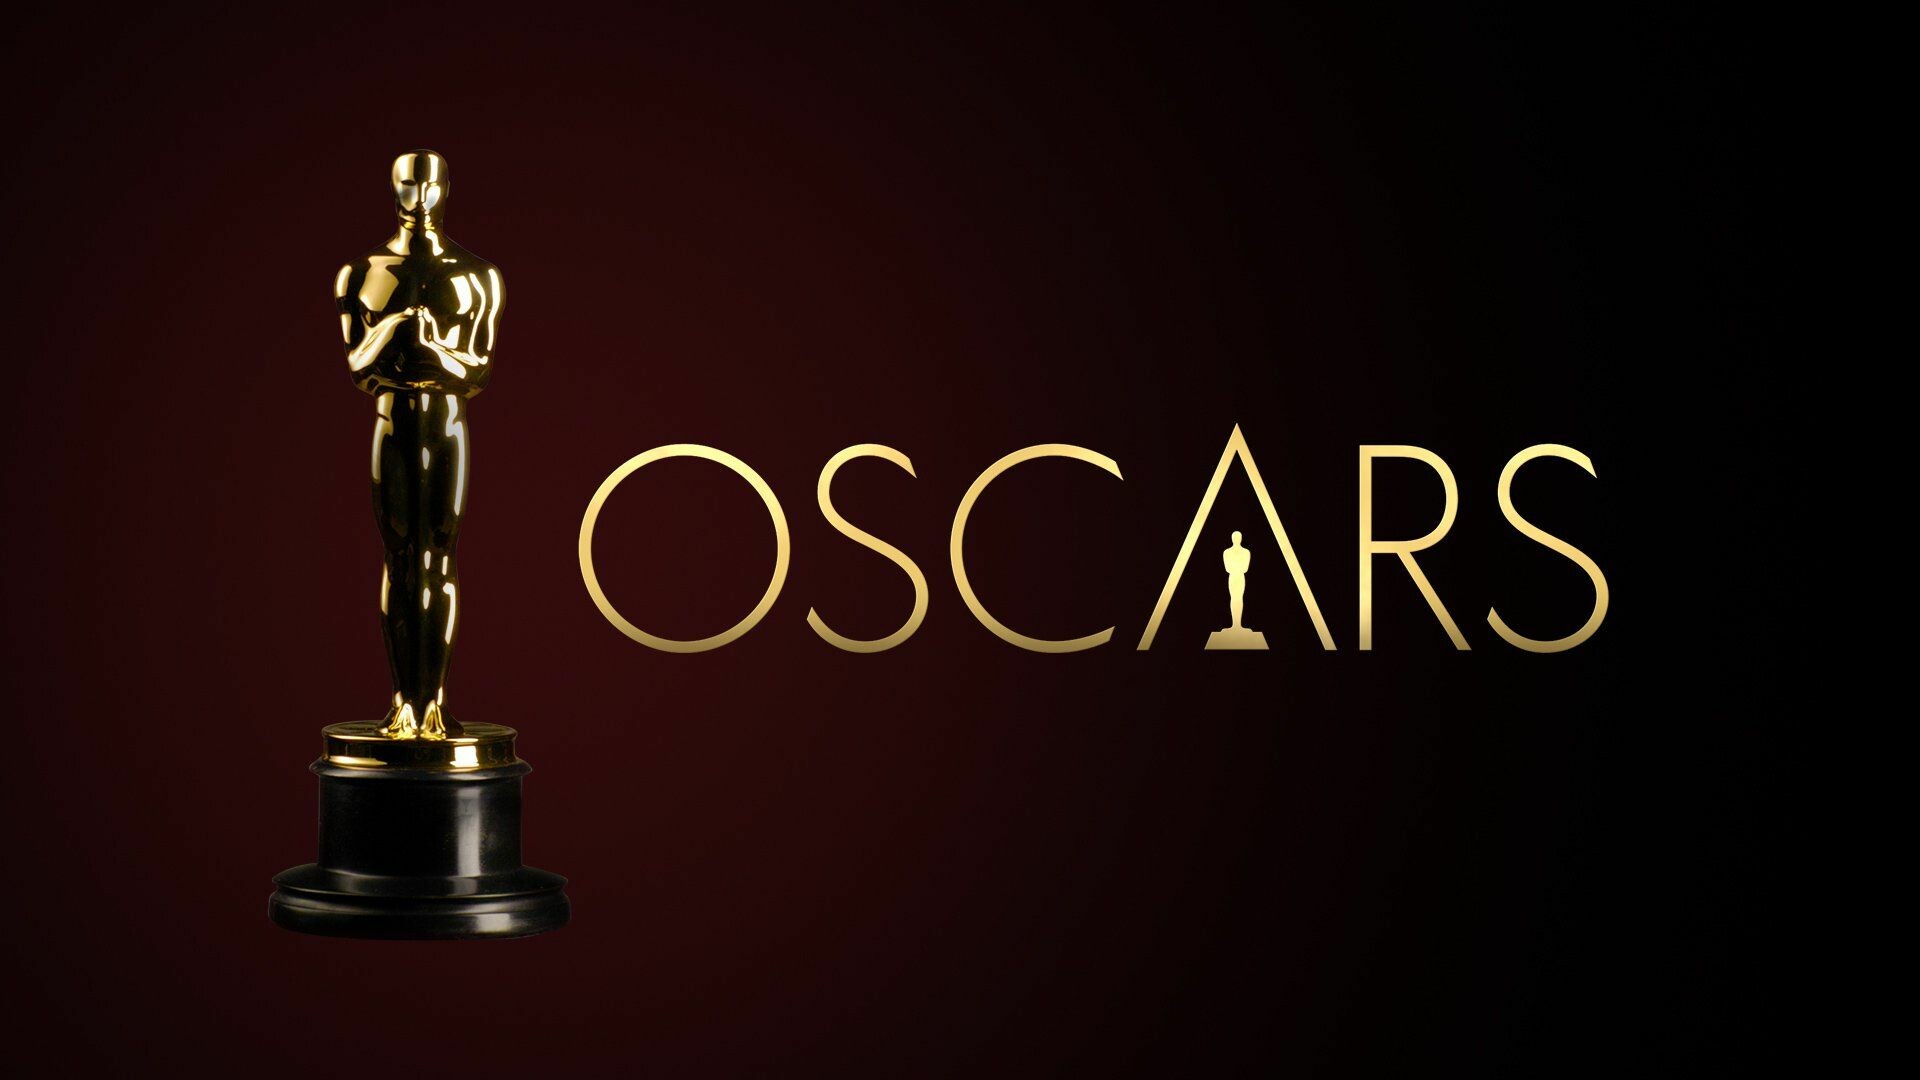 Oscars 2022, Top free wallpapers, Awards ceremony, Movie event, 1920x1080 Full HD Desktop